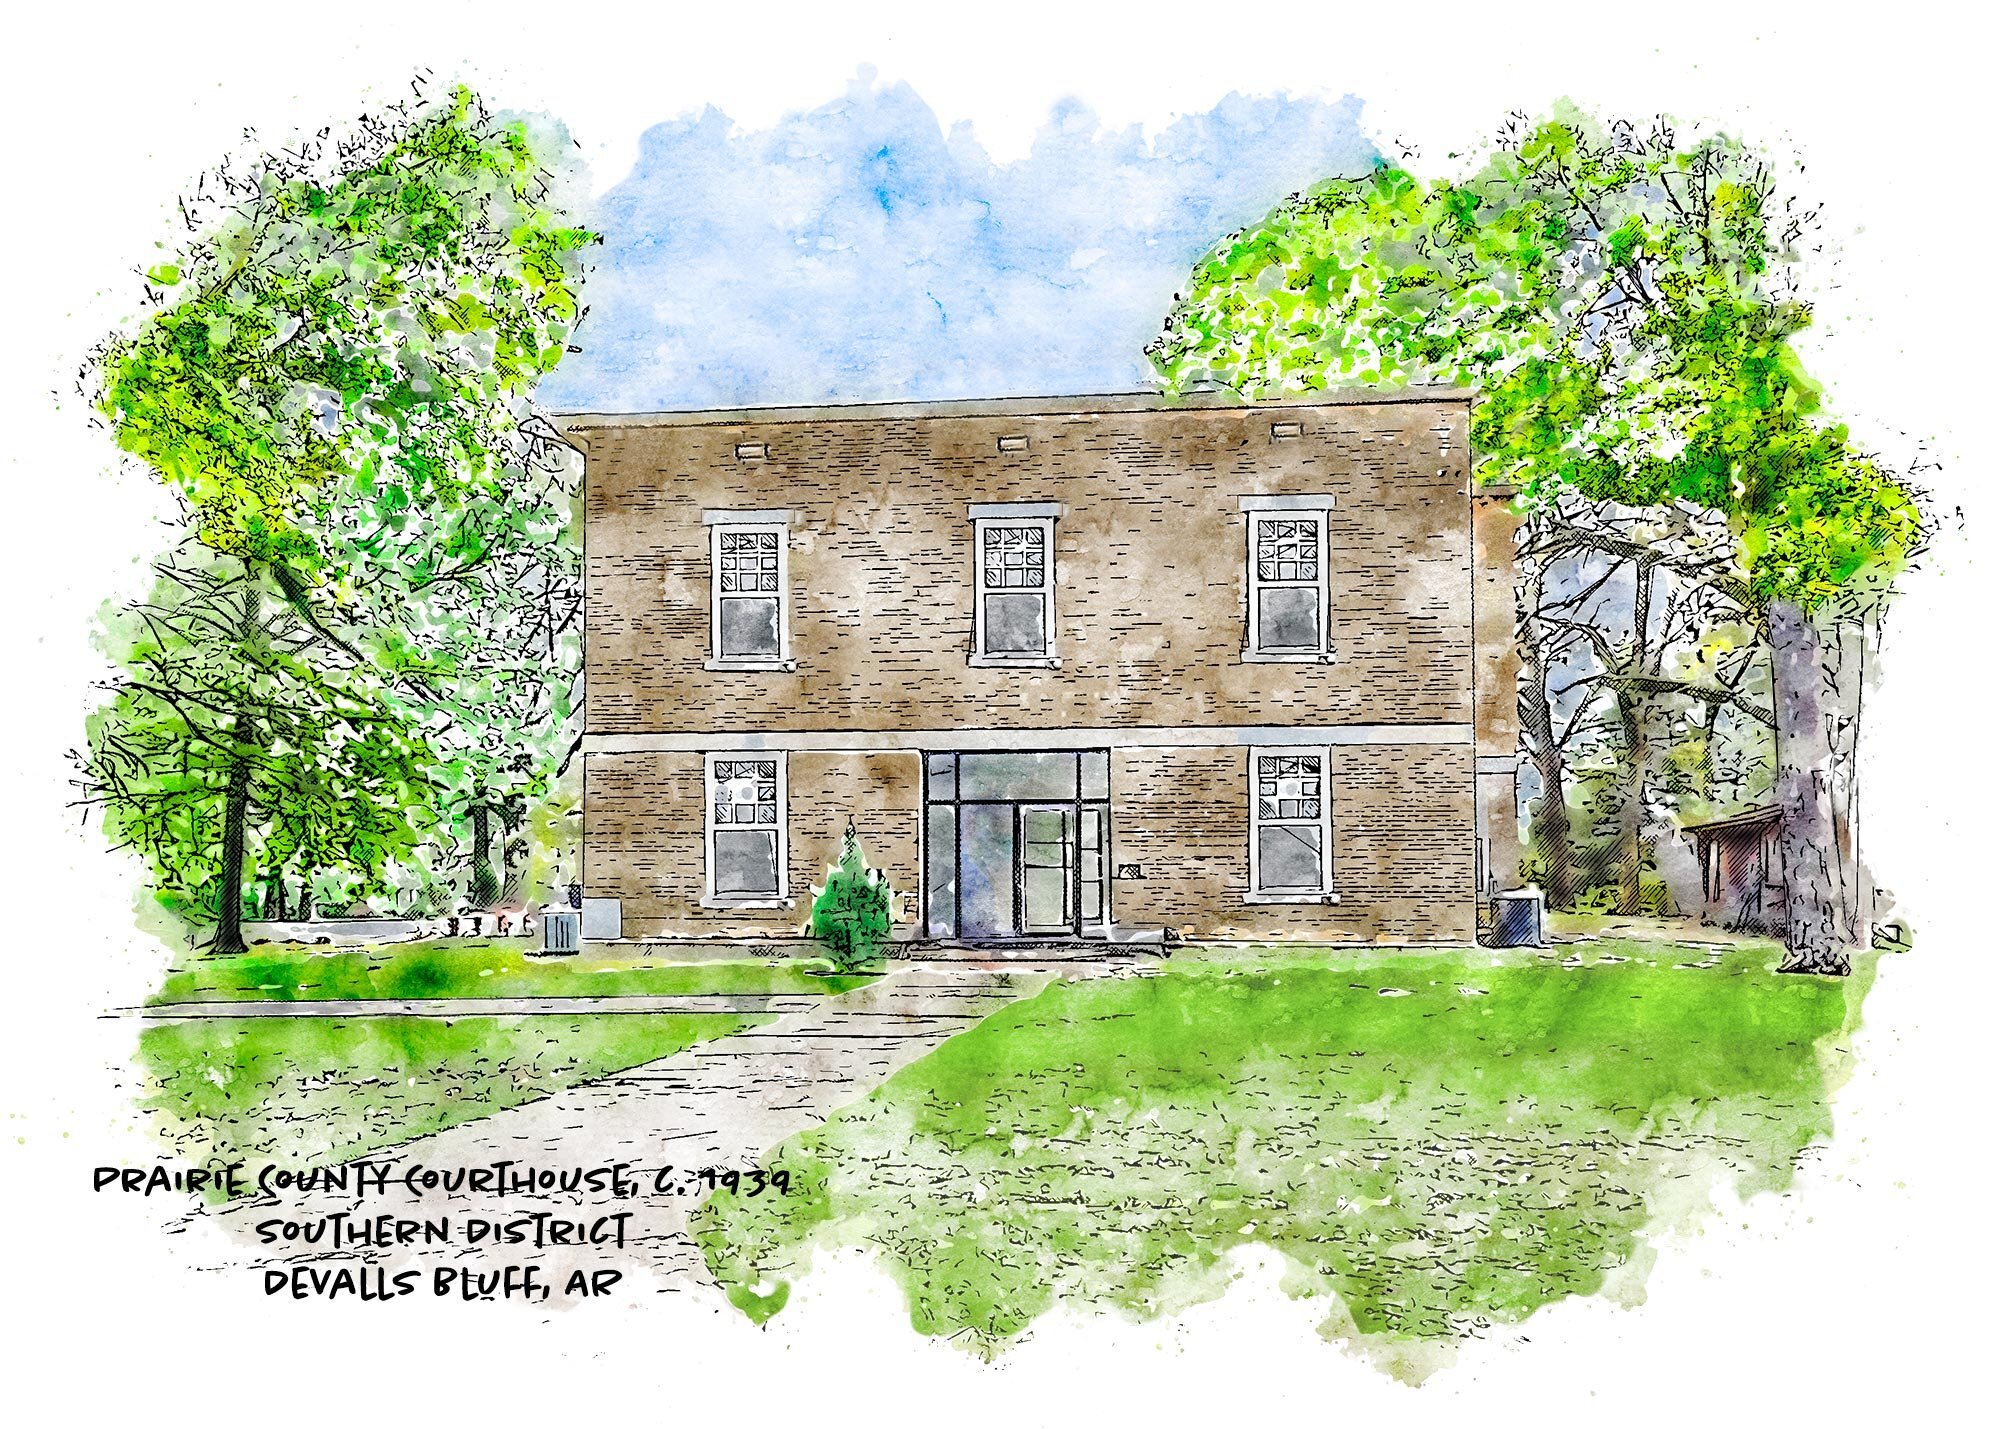 We Just added our 28th #historic #Arkansas #Courthouses, the Prairie County Courthouse Southern District in DeValls Bluff, Arkansas not far from the White River. A New Deal project constructed by the Works Progress Administration, the two-story struc